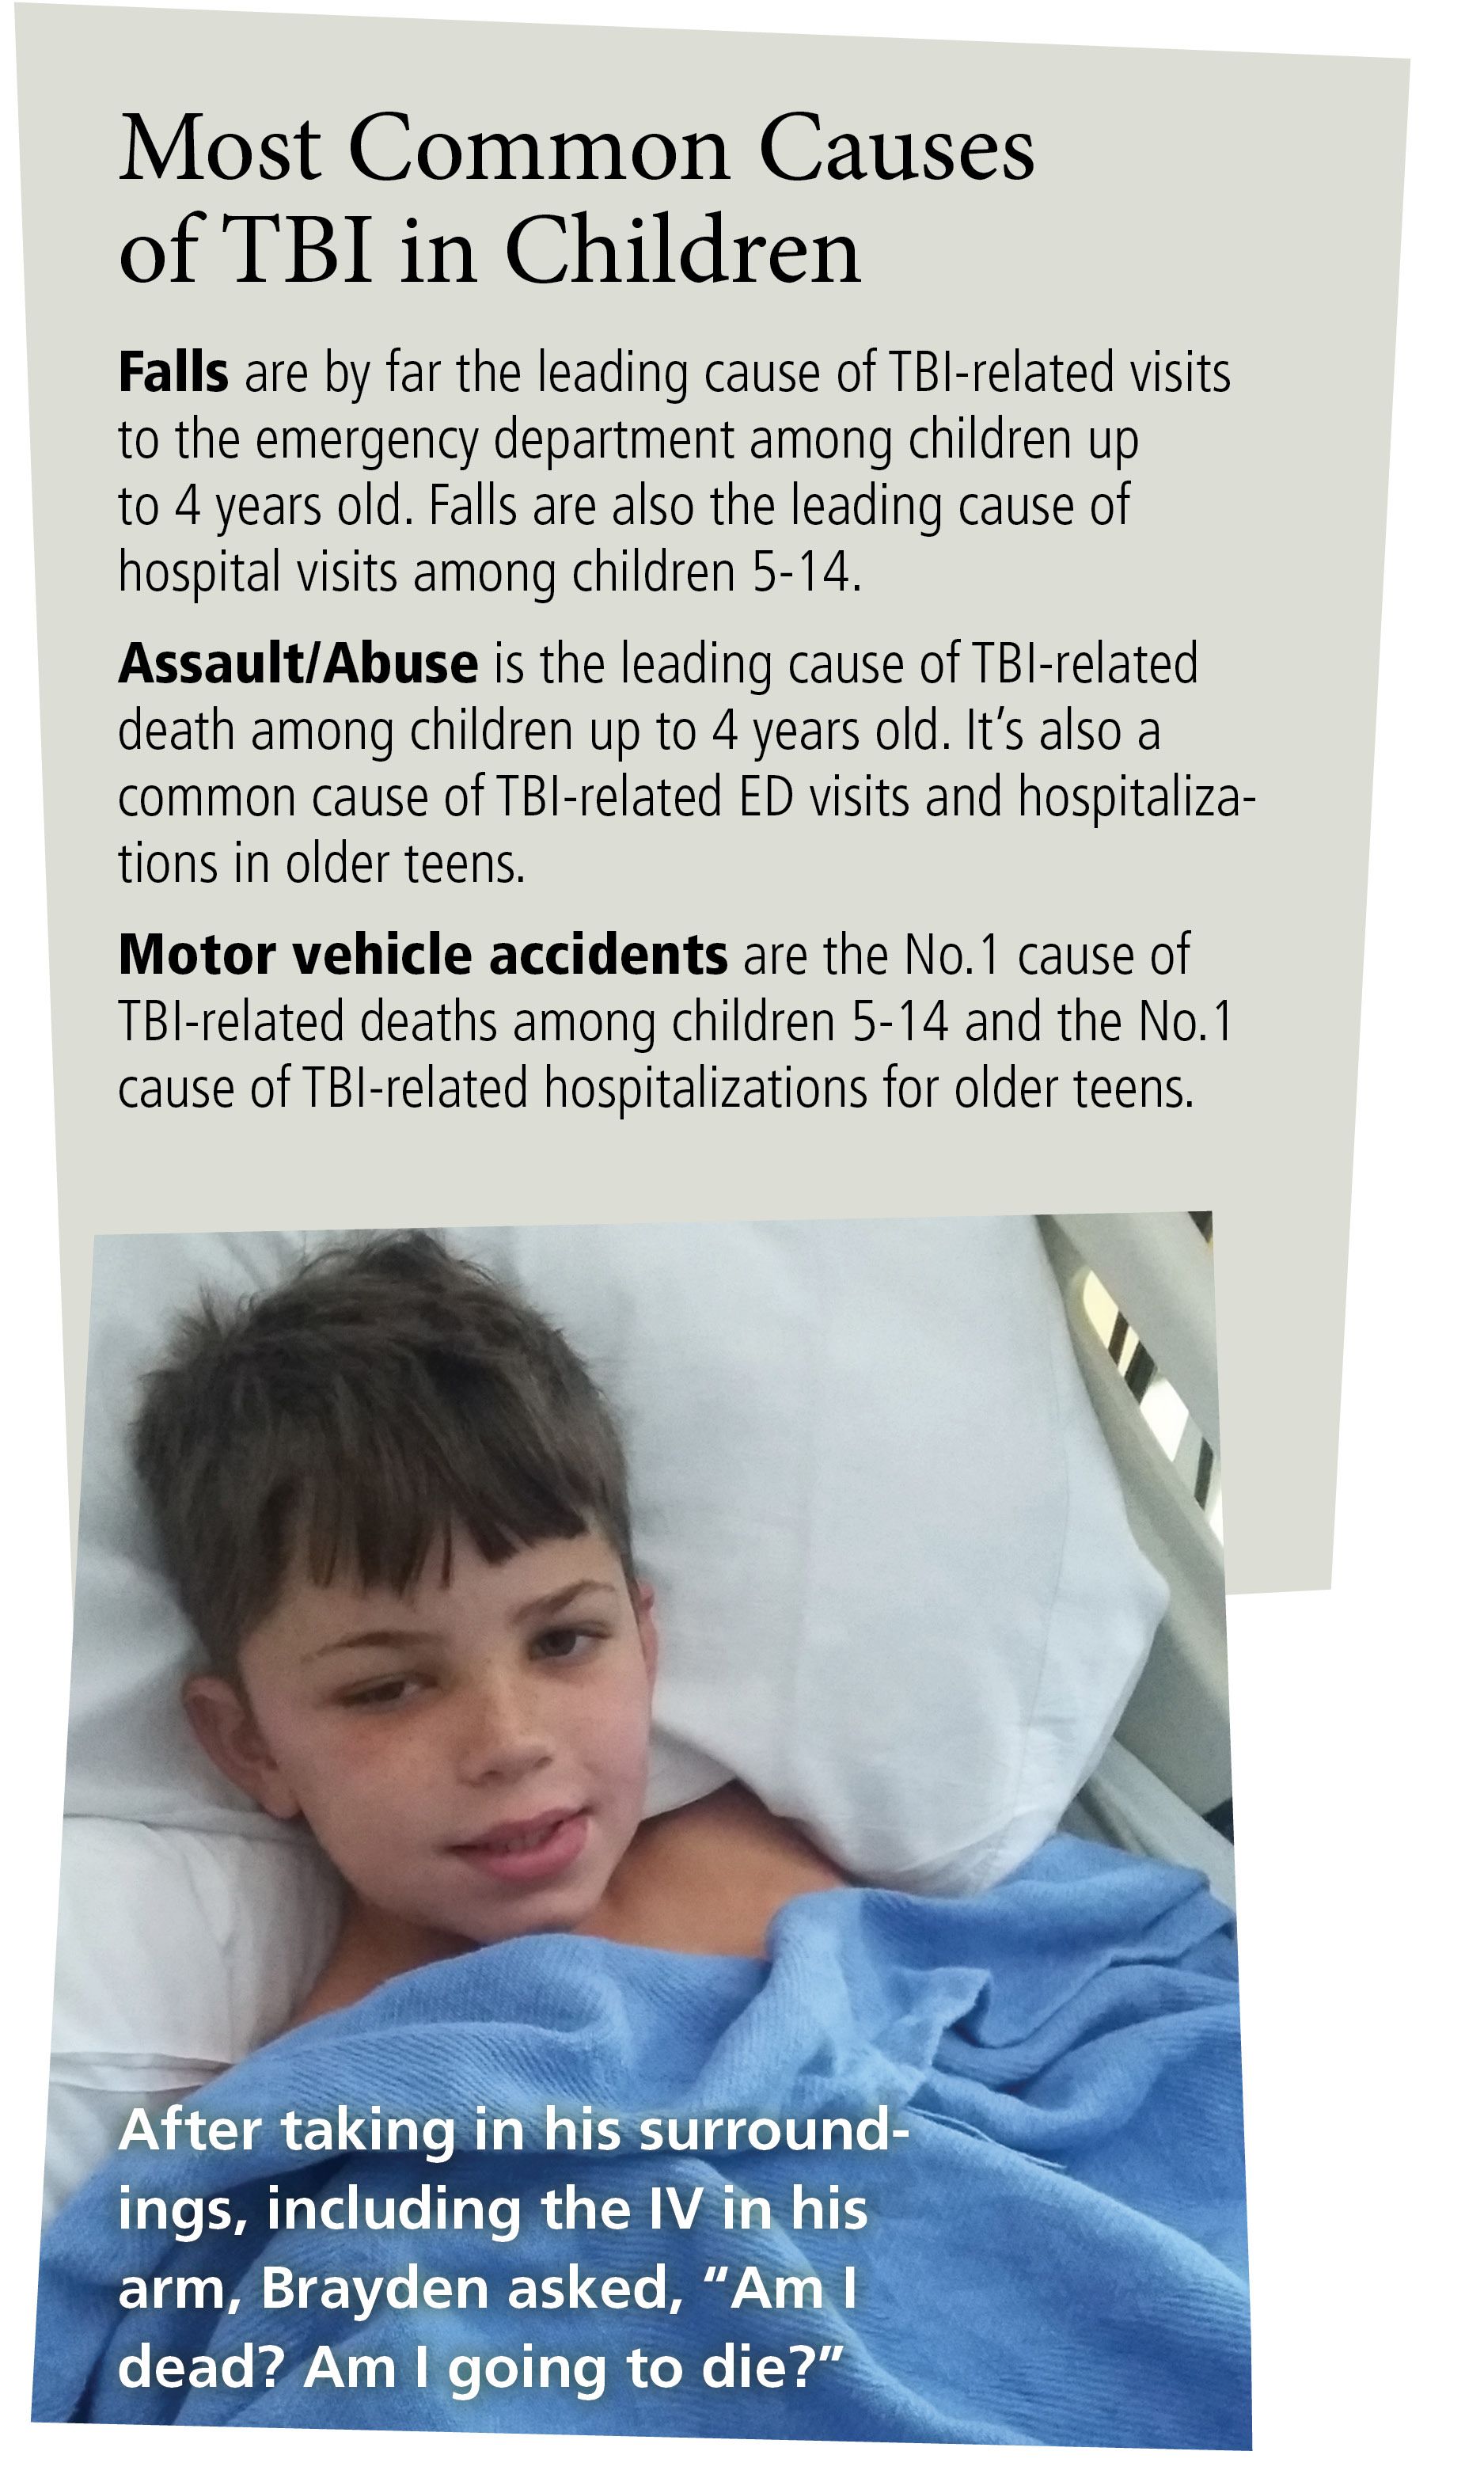 Most common causes of TBI in children chart: falls, abuse/assault, auto accidents